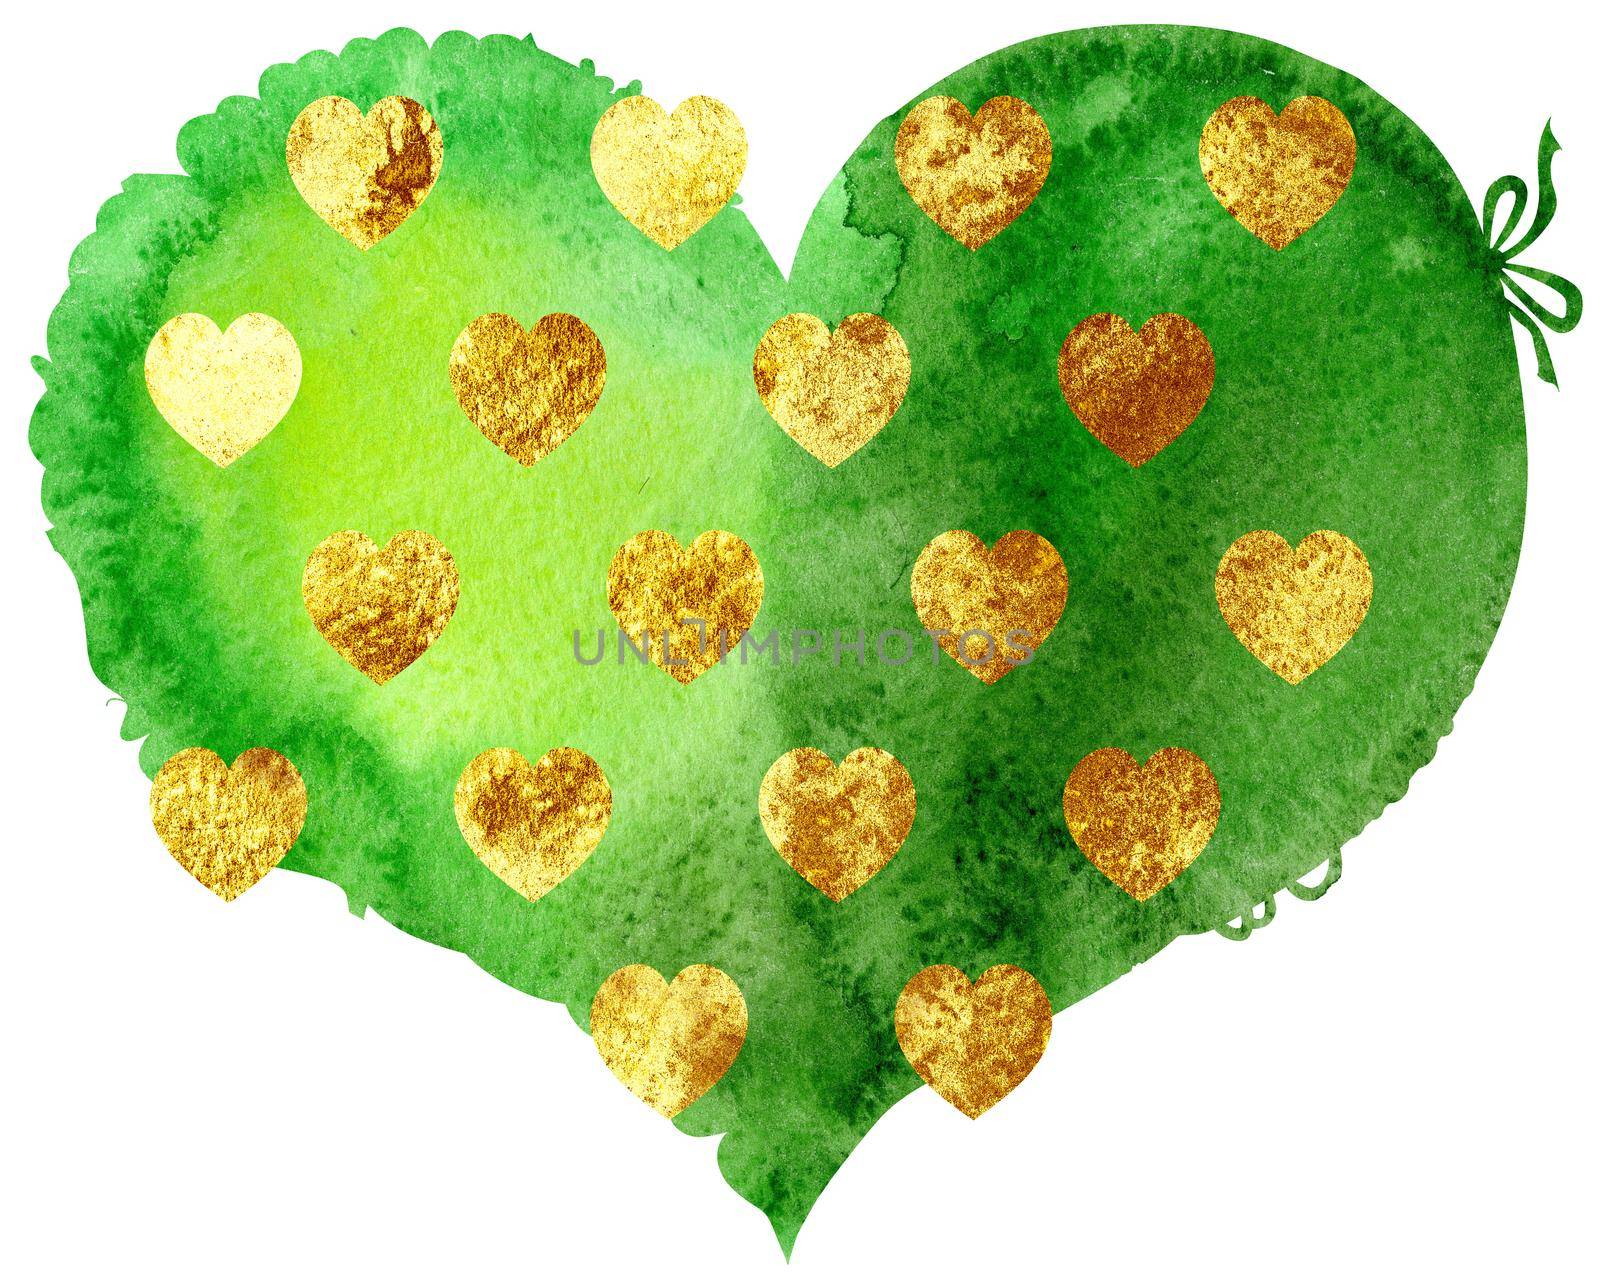 watercolor textured green heart with gold strokes by NataOmsk